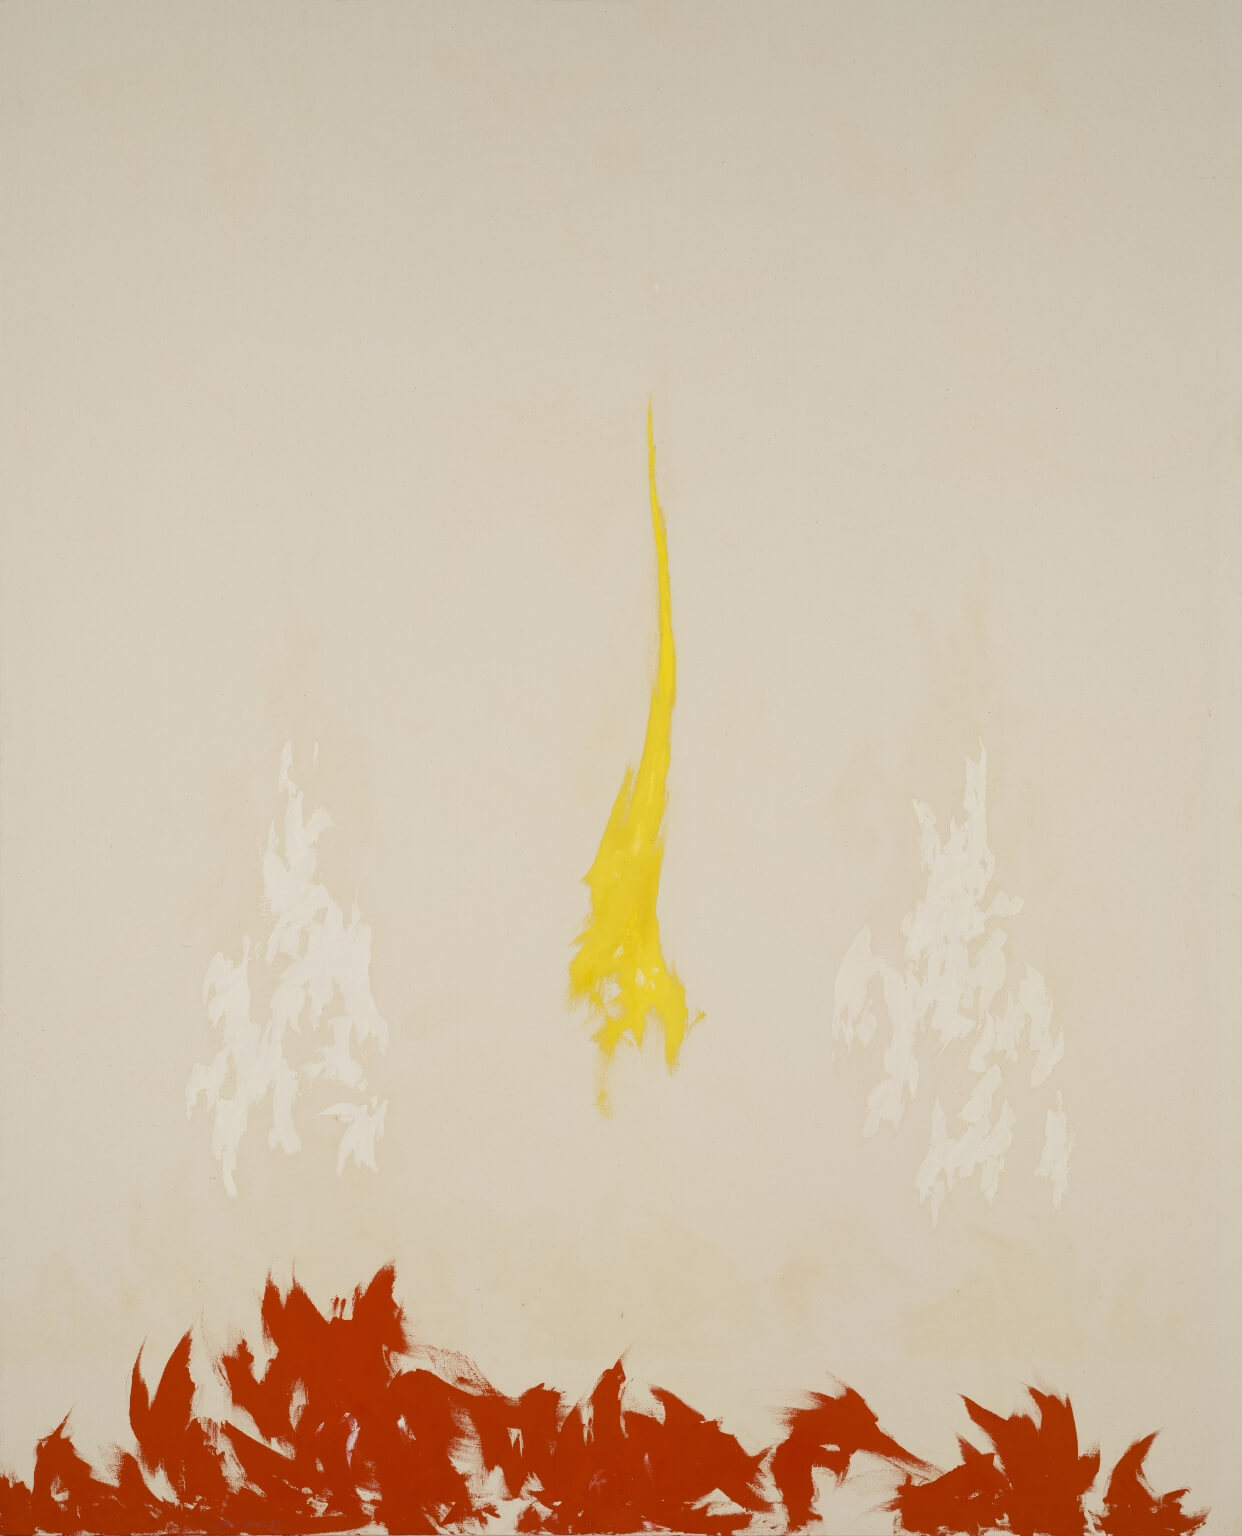 Abstract painting with mostly bare canvas and dark orange jagged forms at the bottom resembling flames with jagged white and yellow forms rising from them